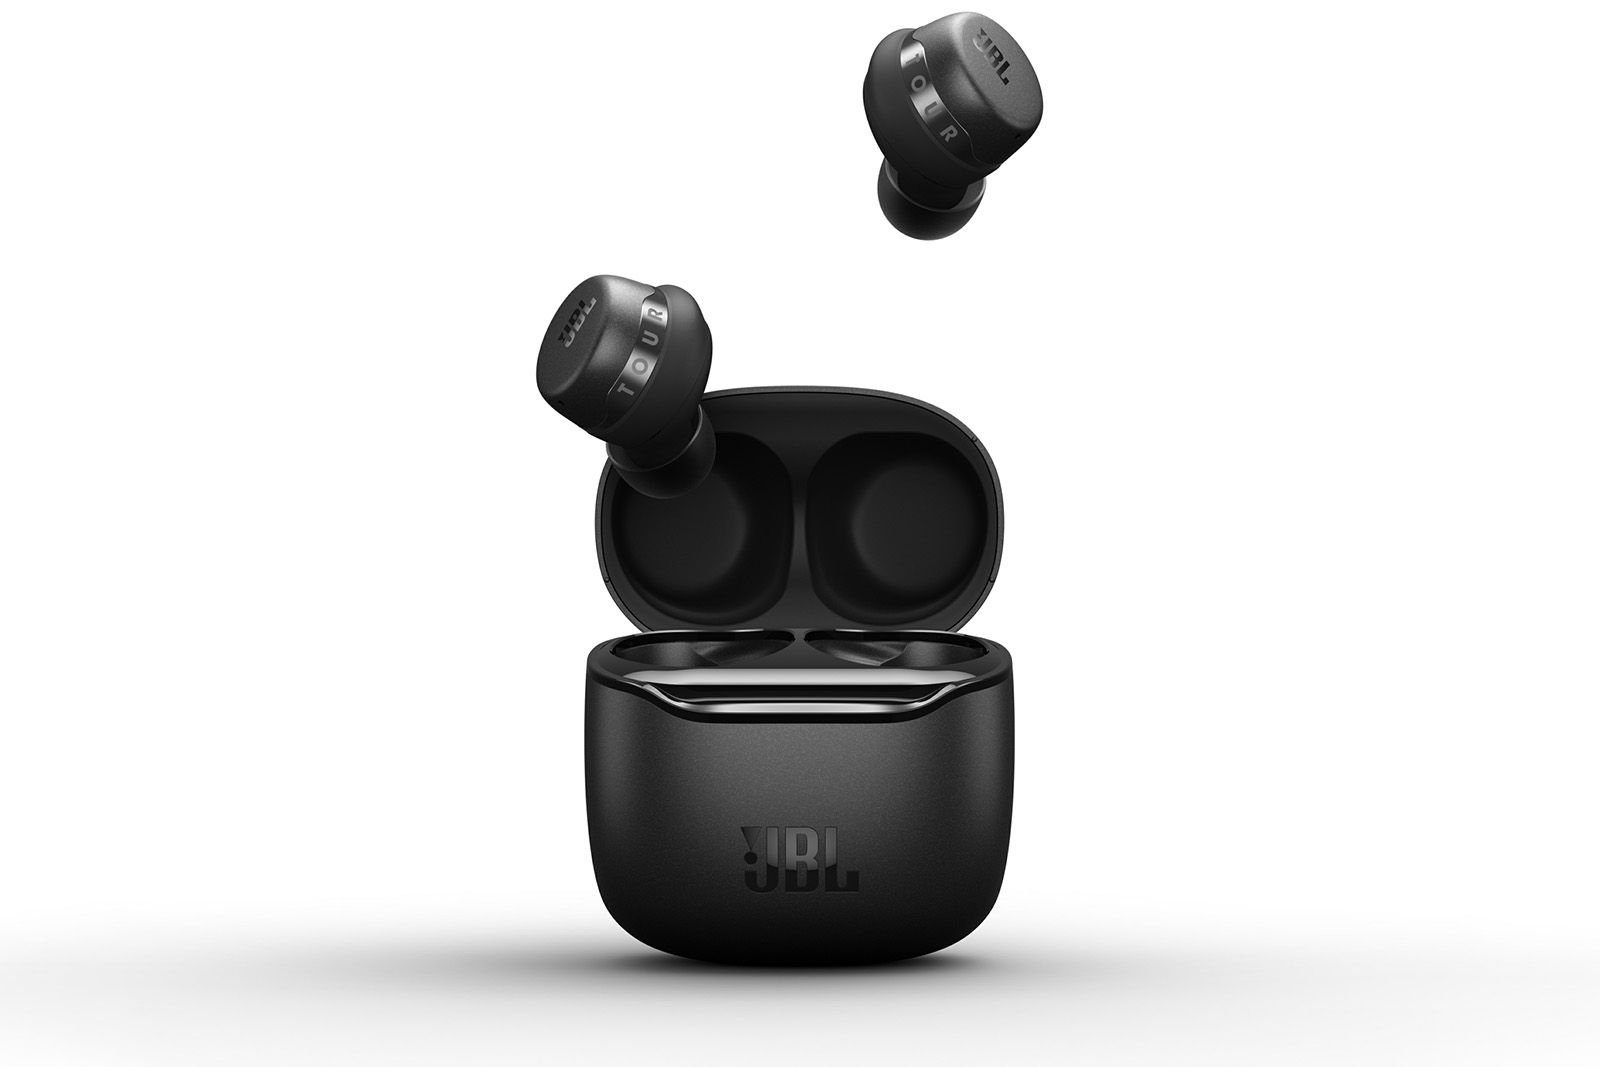 JBL Tour One over-ears and Tour Pro+ TWS earbuds take aim at Bose photo 2